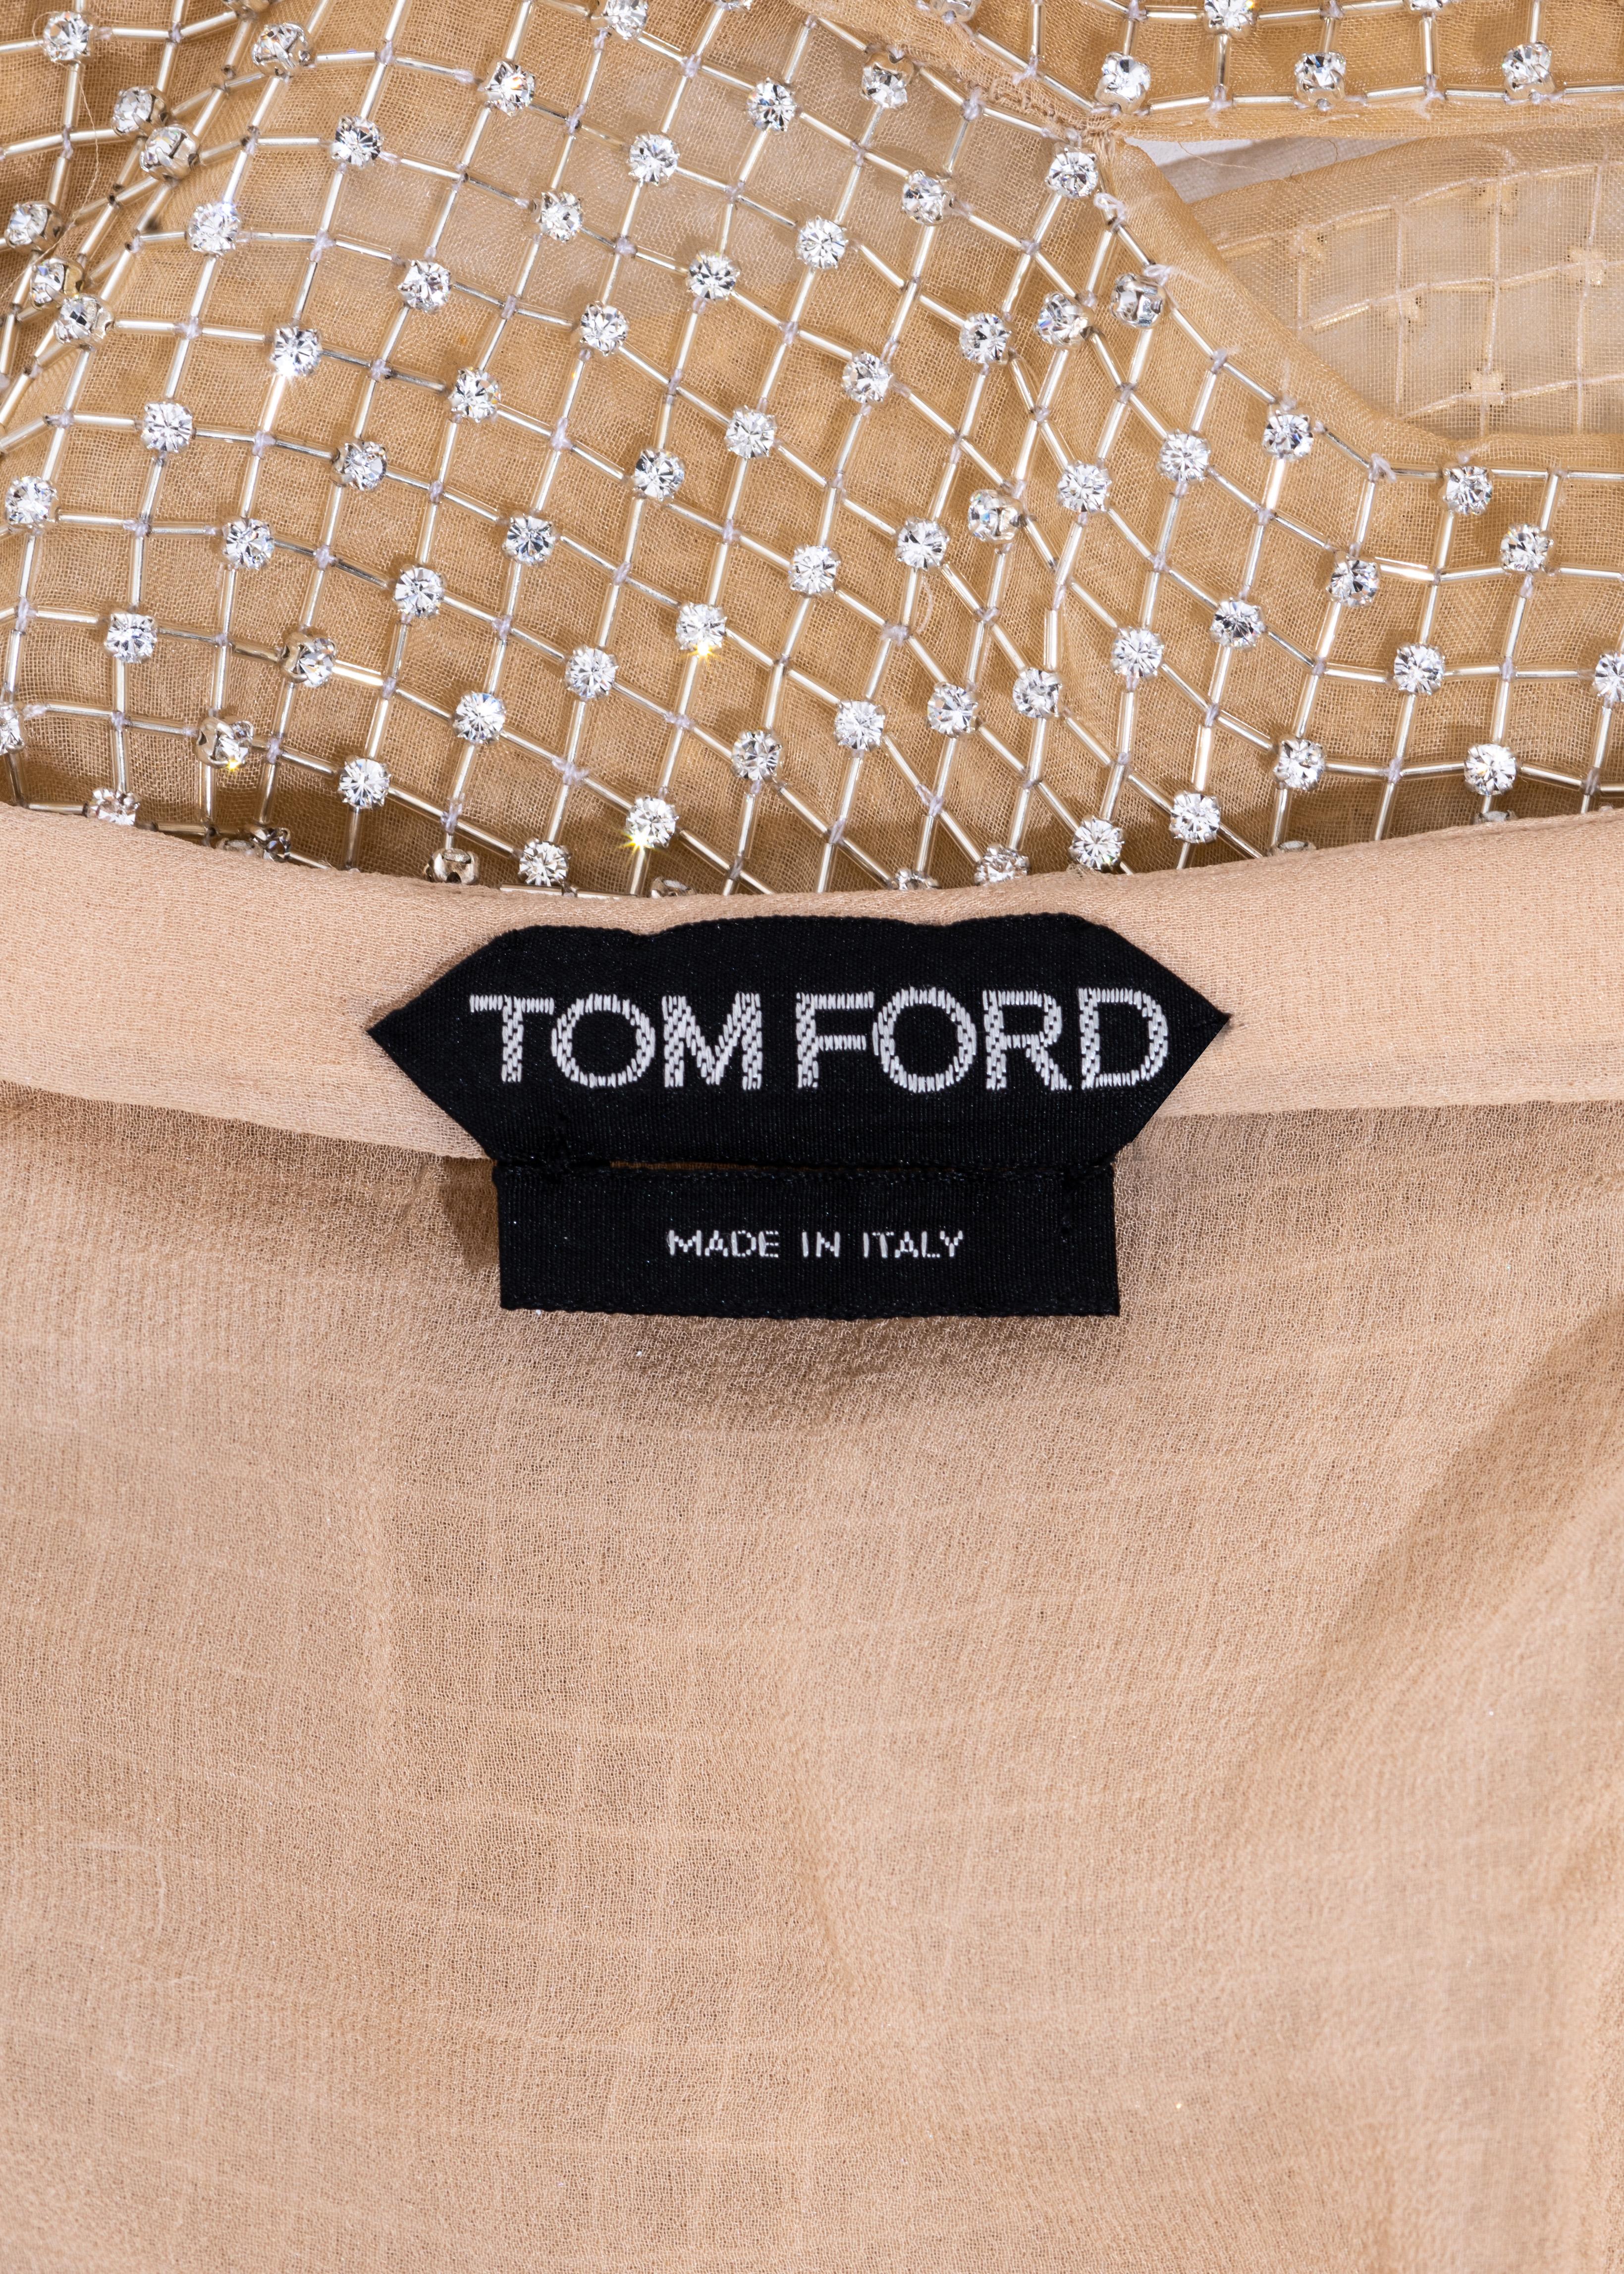 Tom Ford nude silk organza evening dress in a lattice of glass beads, ss 2013 1